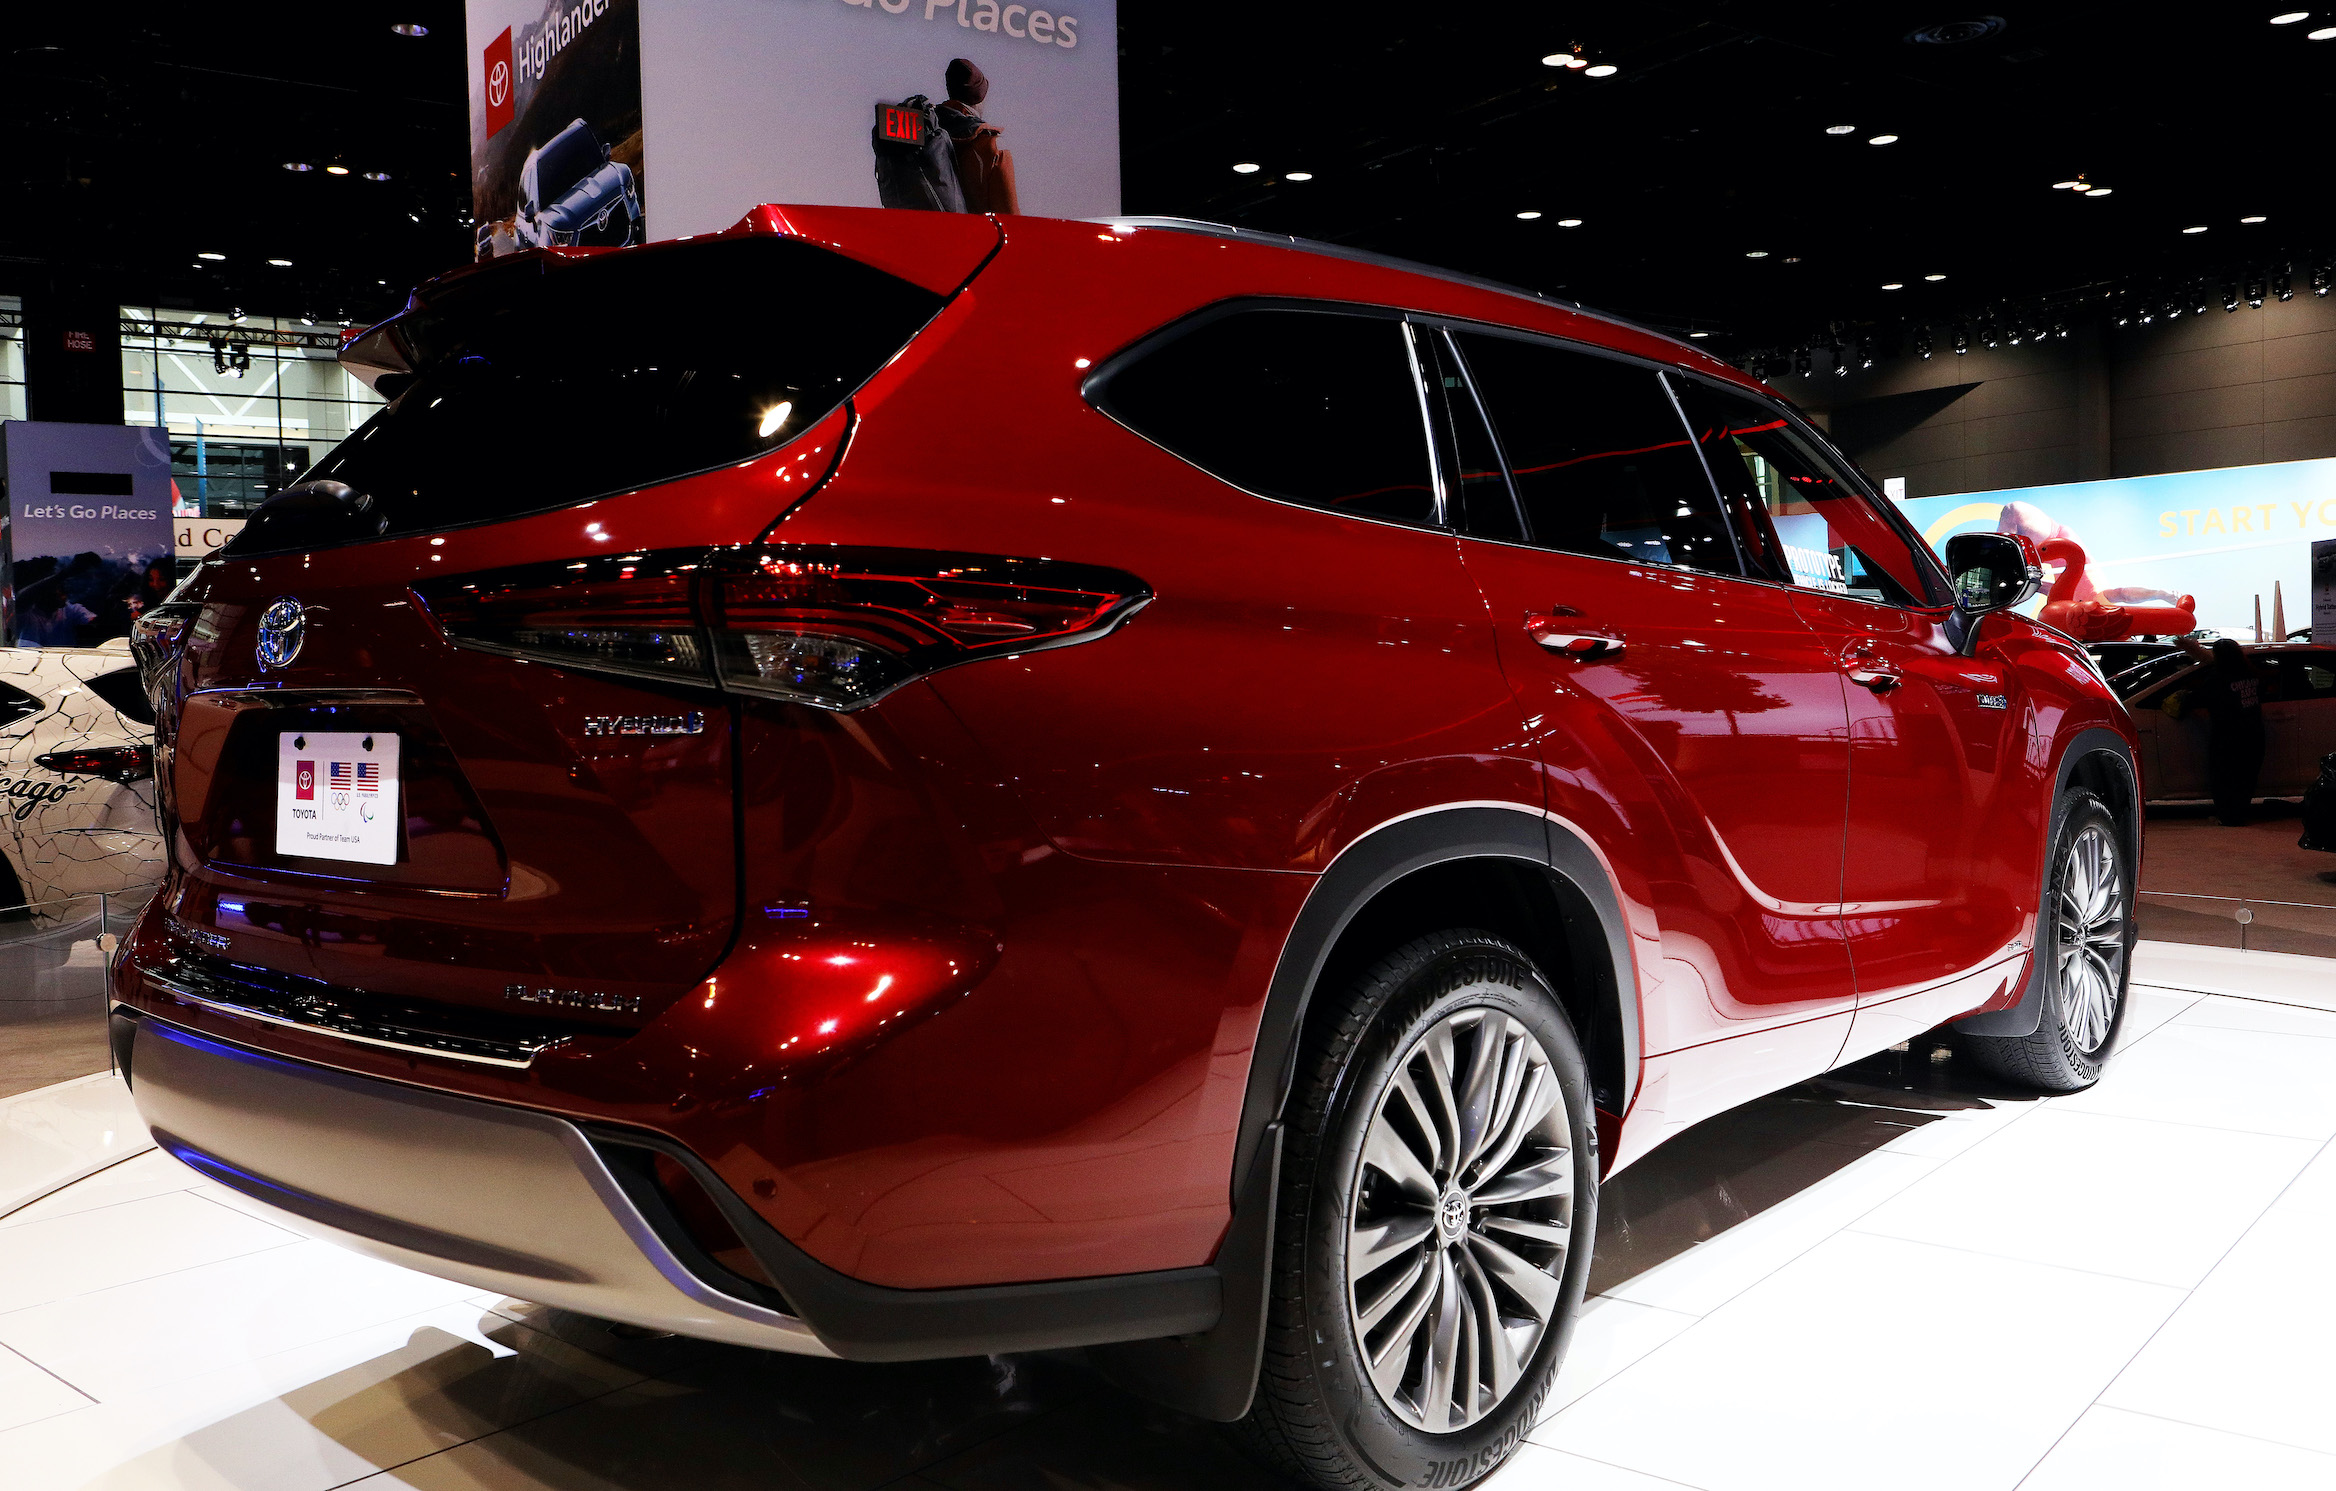 2020 Toyota Highlander Hybrid is on display at the 112th Annual Chicago Auto Show